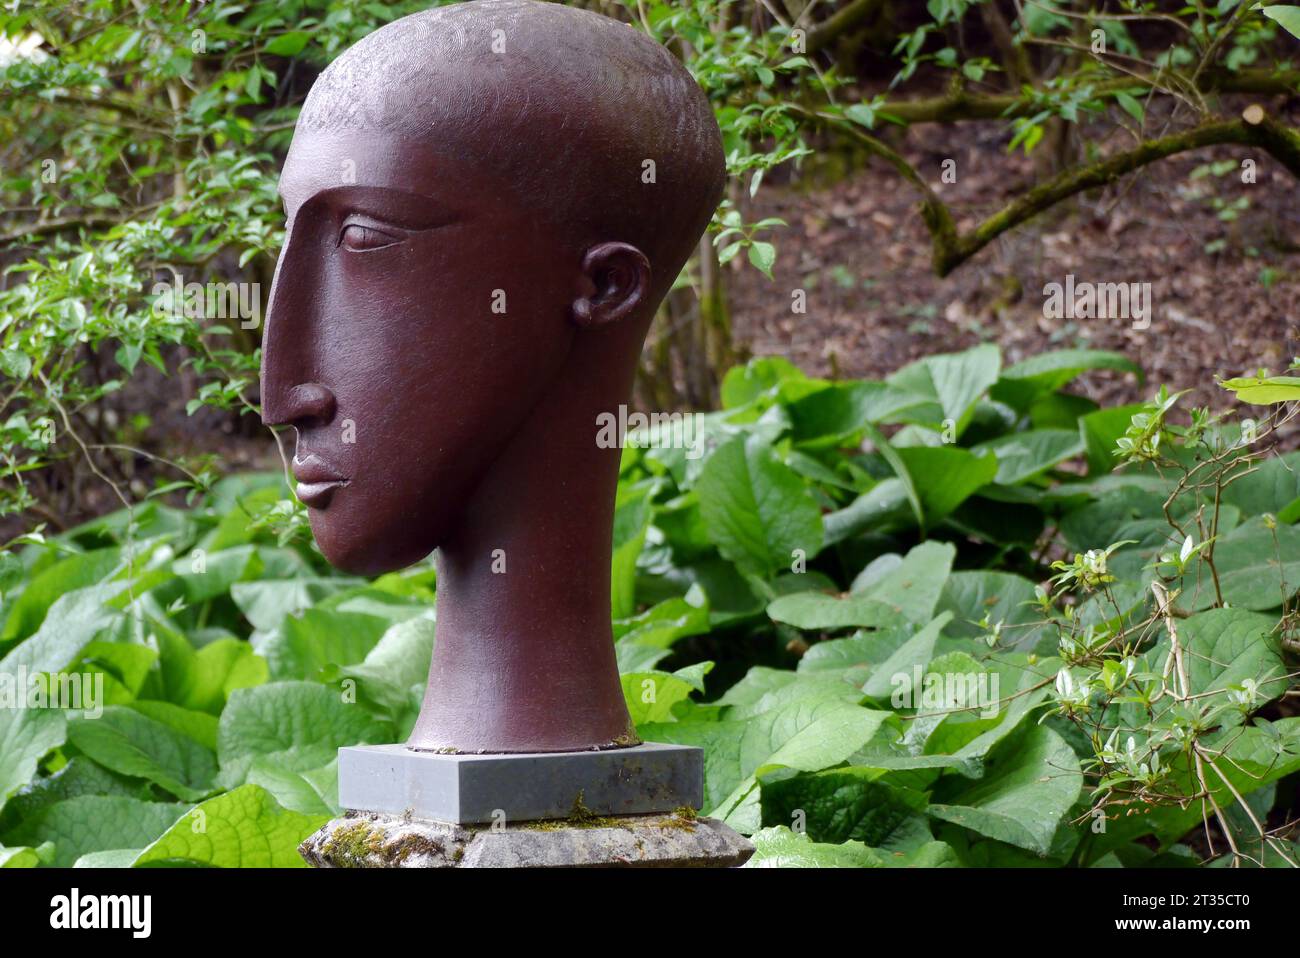 Large Brown Tribal Head by Ceramic Sculptor Patricia Volk in the Woods in the Himalayan Garden & Sculpture Park, North Yorkshire, England, UK. Stock Photo